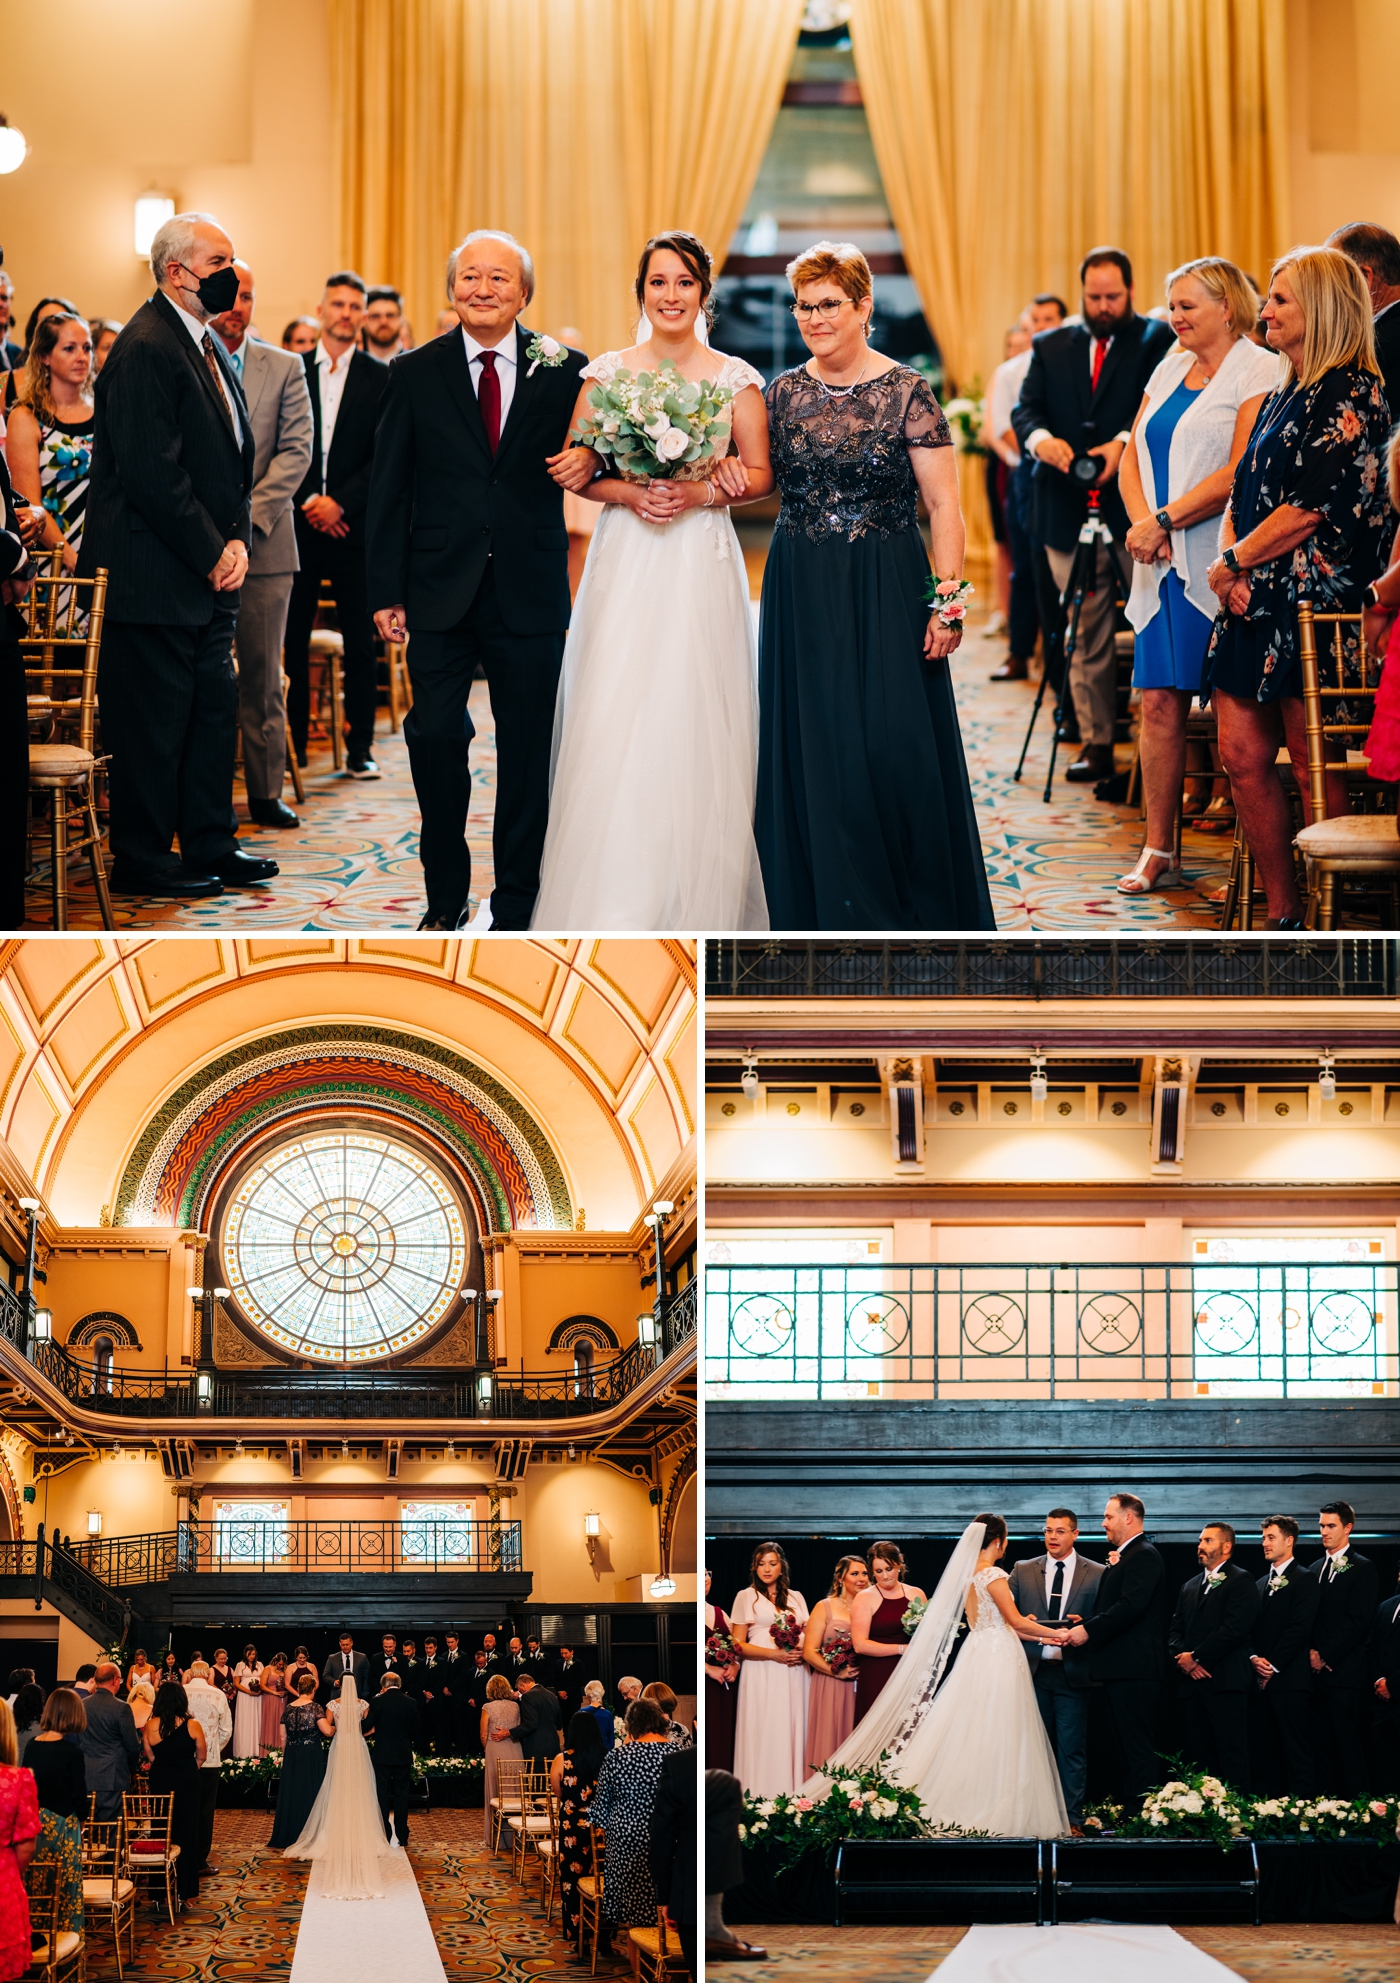 Wedding ceremony at Union Station in Indiana 